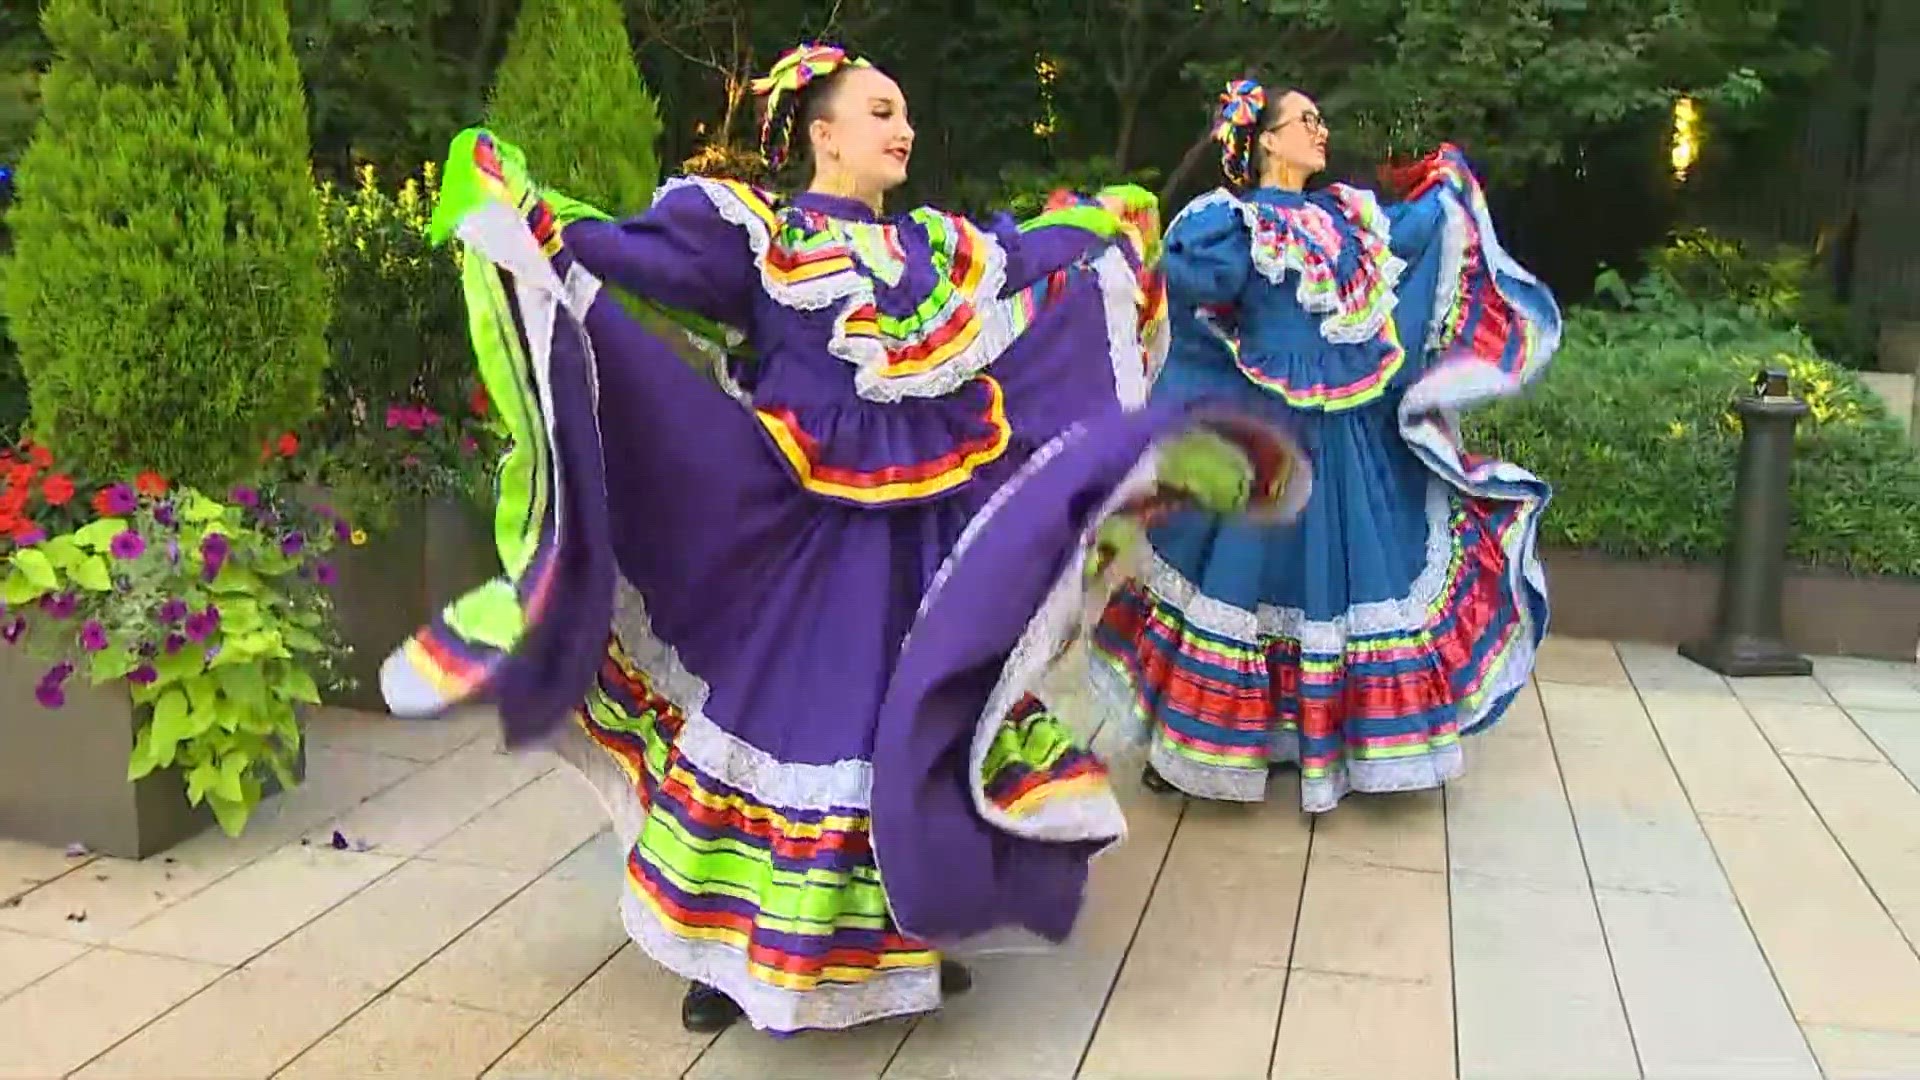 The youth group is open to all with the opportunity to connect all dancers to Mexican culture and the Spanish language. Joyas Mestizas has several upcoming shows.